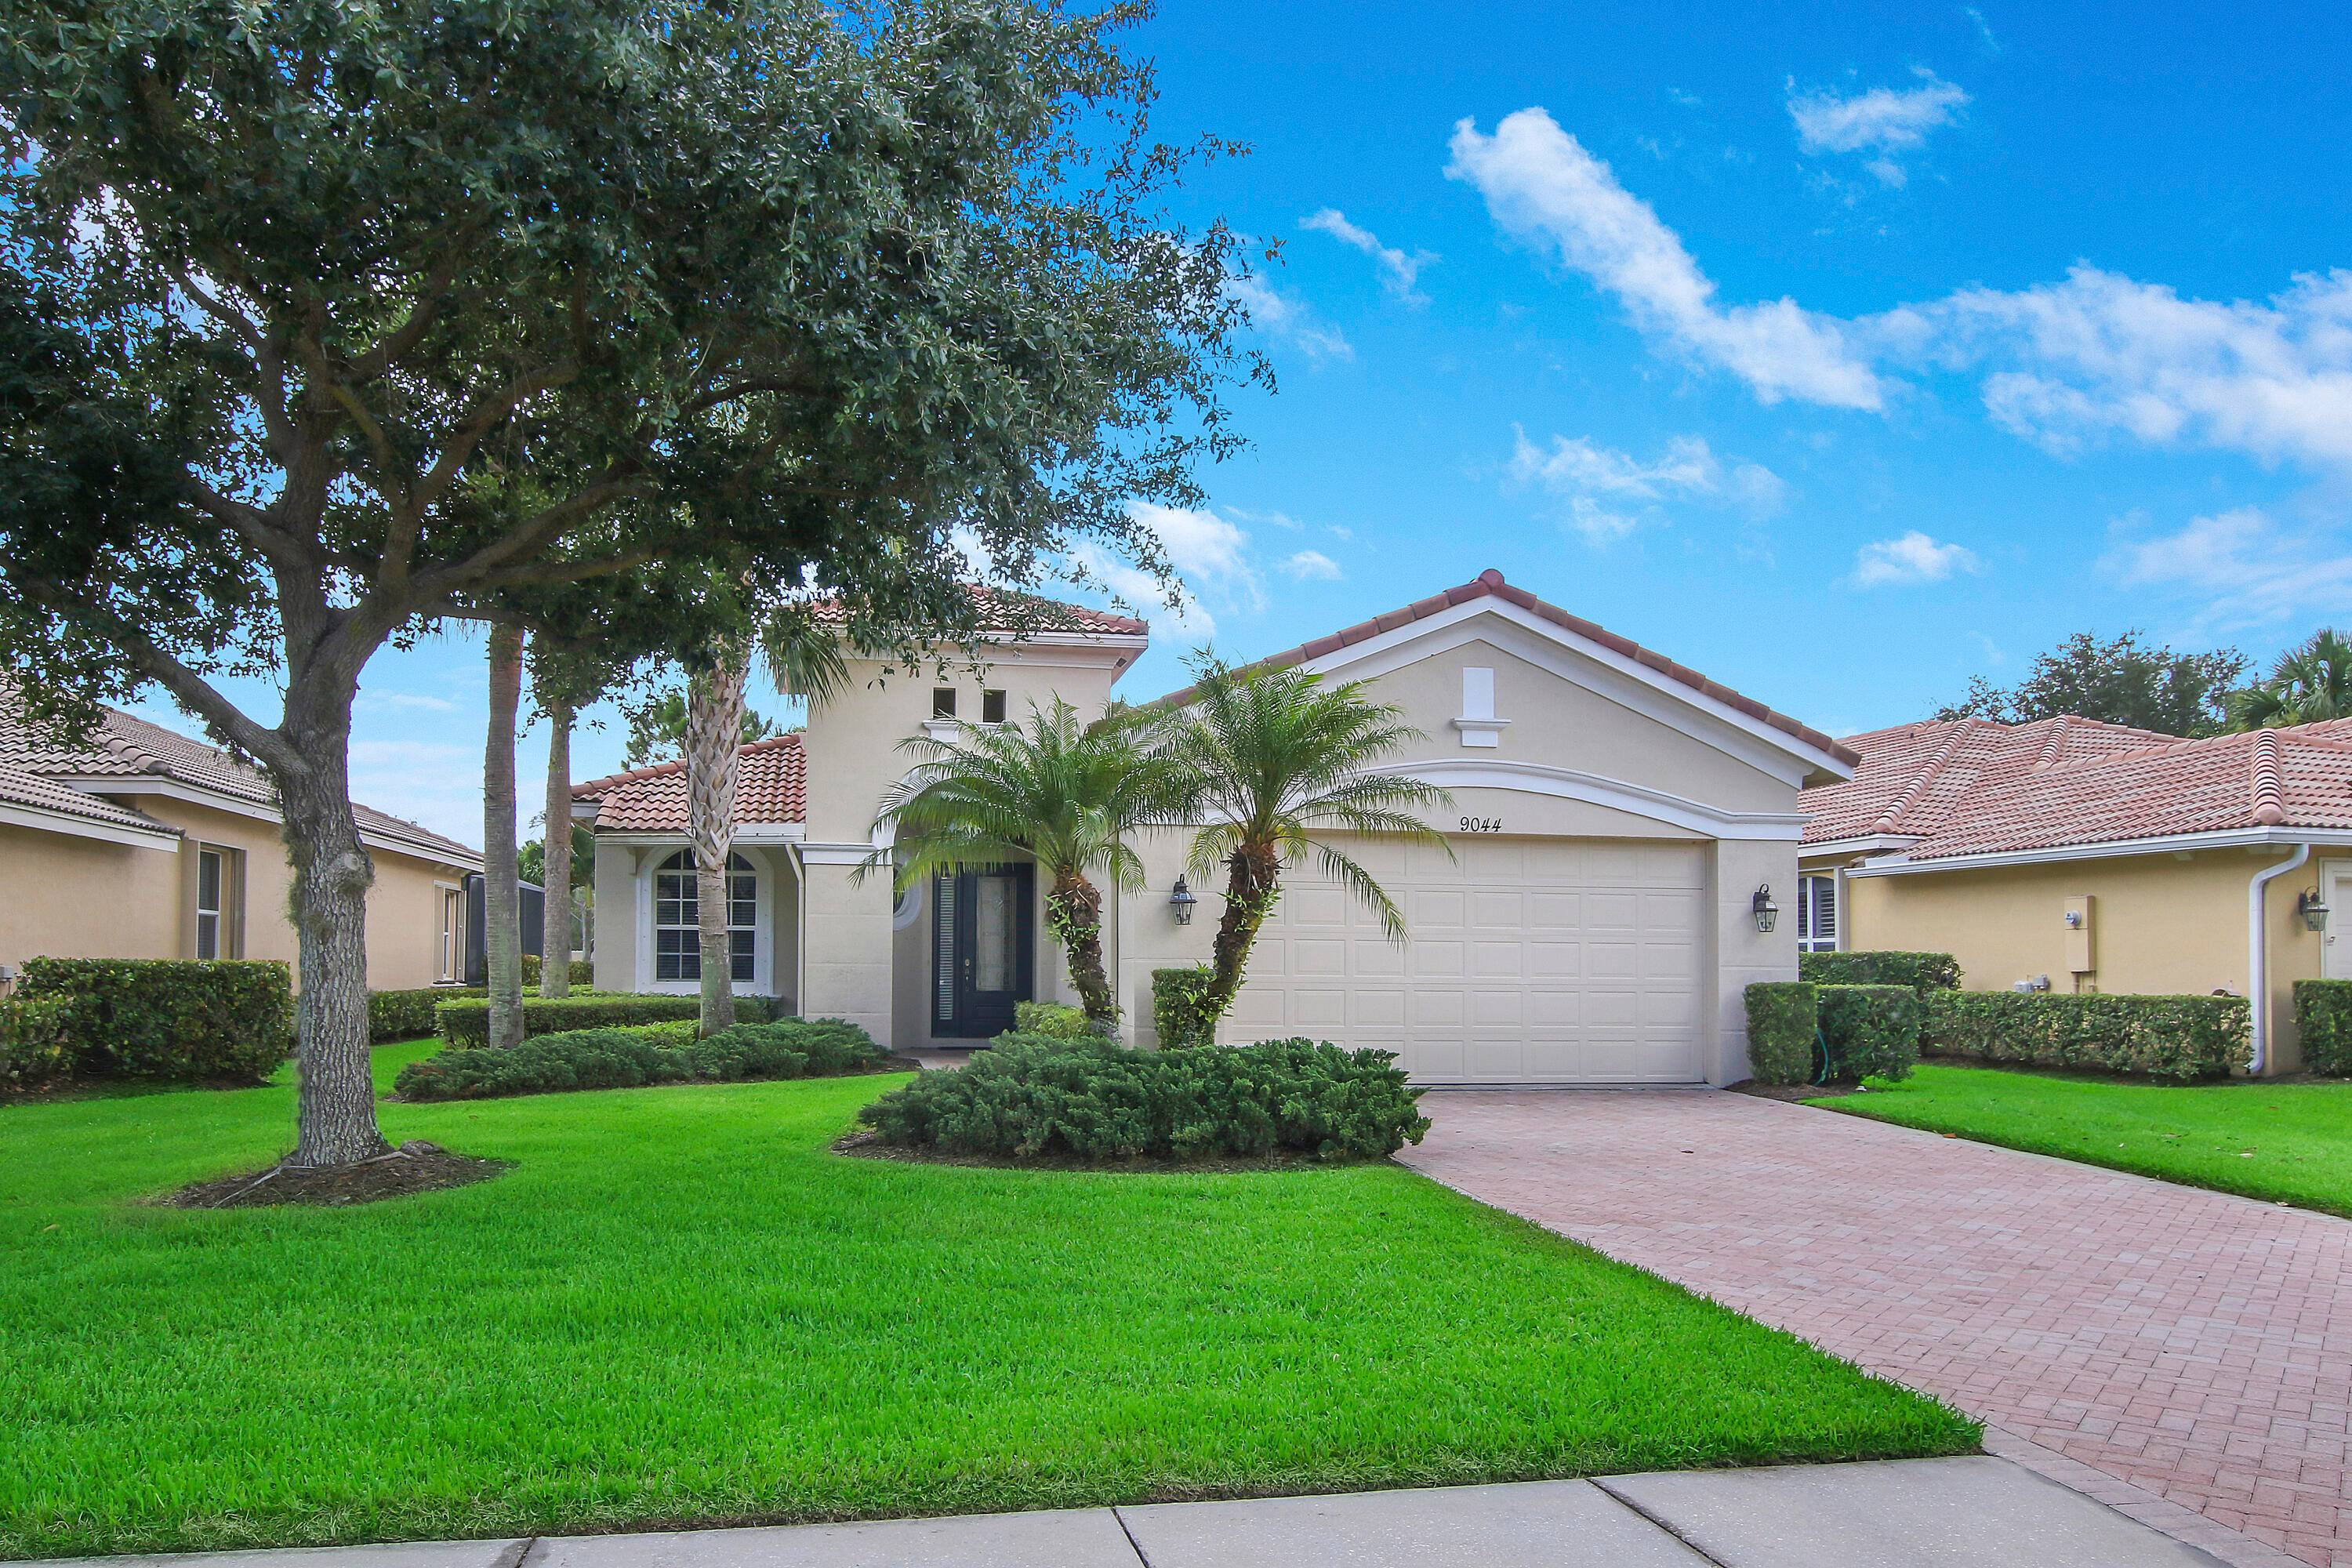 Meticulous 3BR 2BA 2CG 'Fairview' plan in the 24 hour guard gated community of PGA Village with LAKE VIEWS and just steps to the community clubhouse !